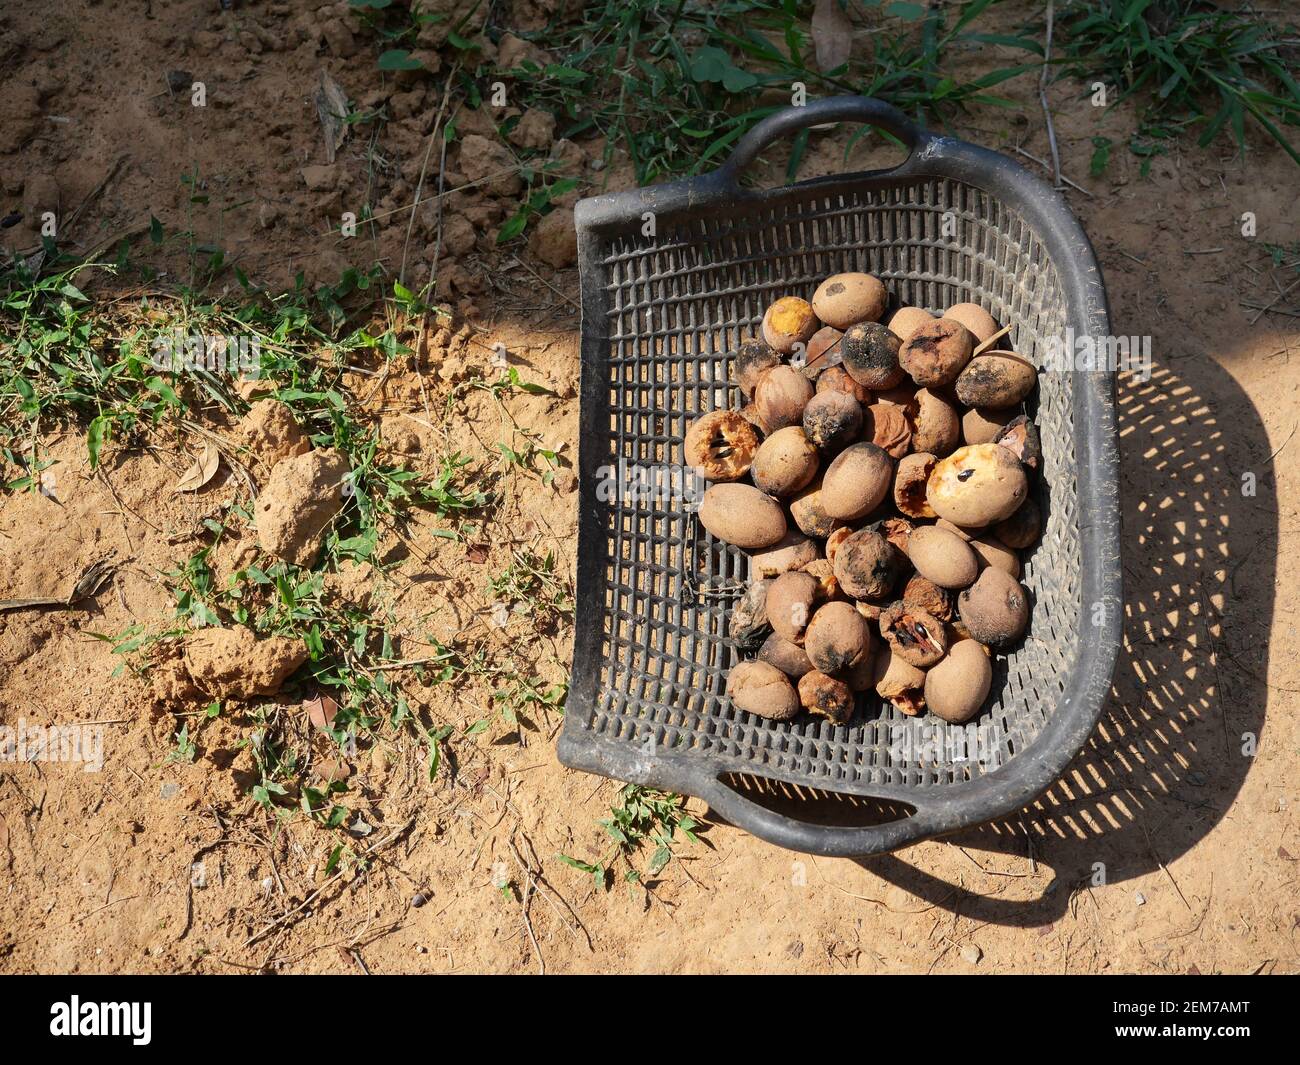 Rotten and damaged Sapodilla fruits in black color clam shell shaped basket on dirt land, Composting from fruit and food waste in Thailand Stock Photo